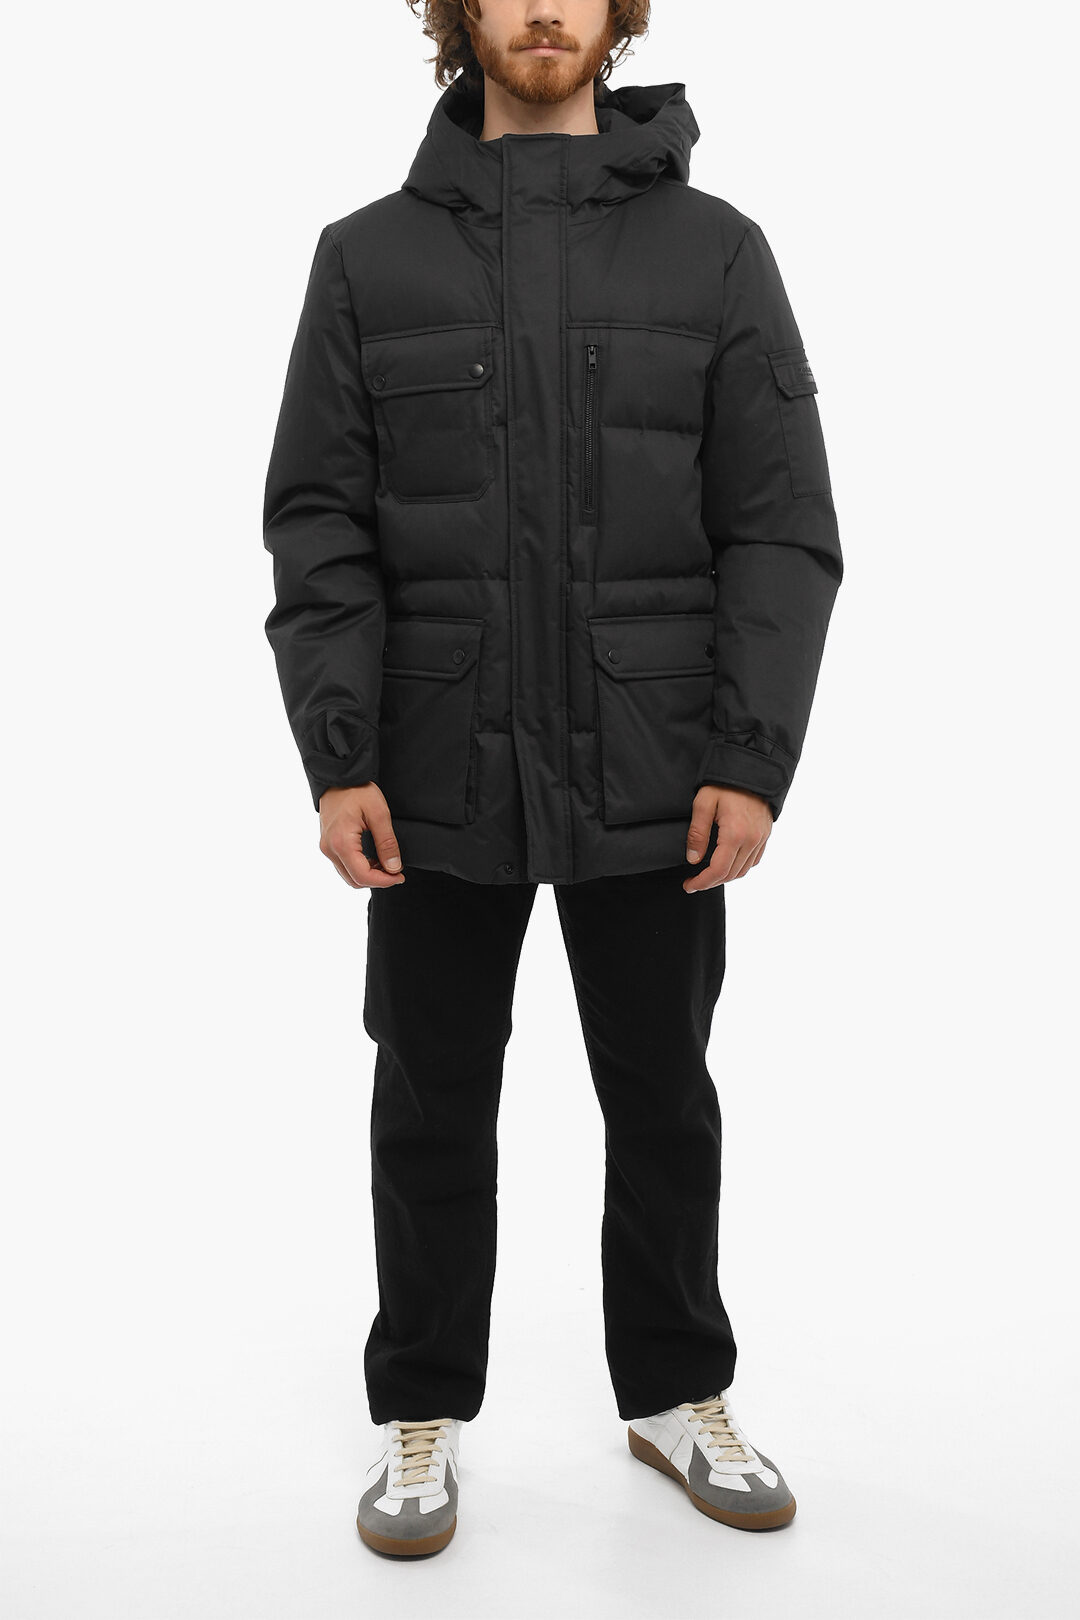 Woolrich Solid Color Utility Down Jacket with Hood men - Glamood Outlet